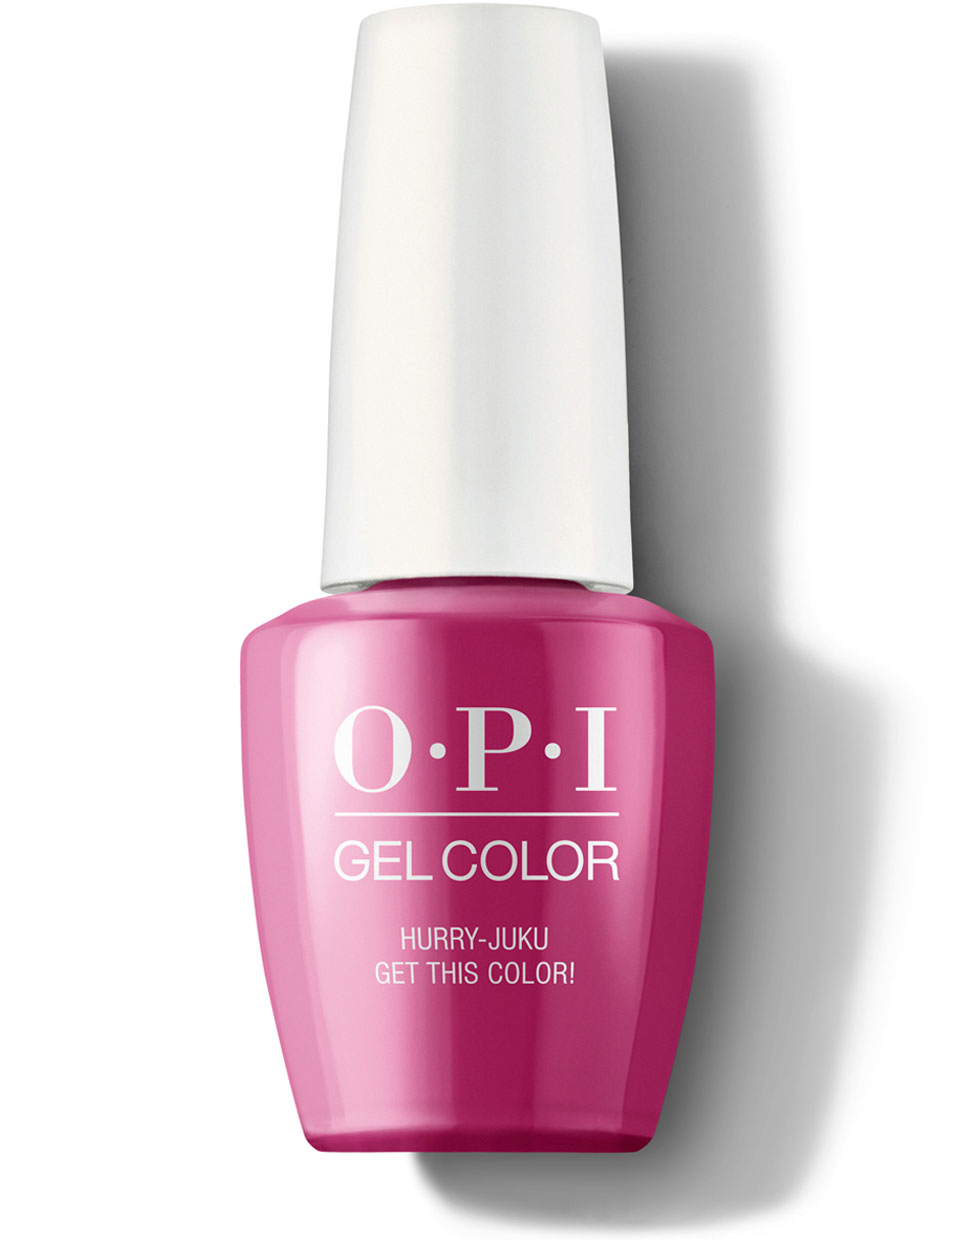 Hurry-juku Get This Color! - GelColor | OPI